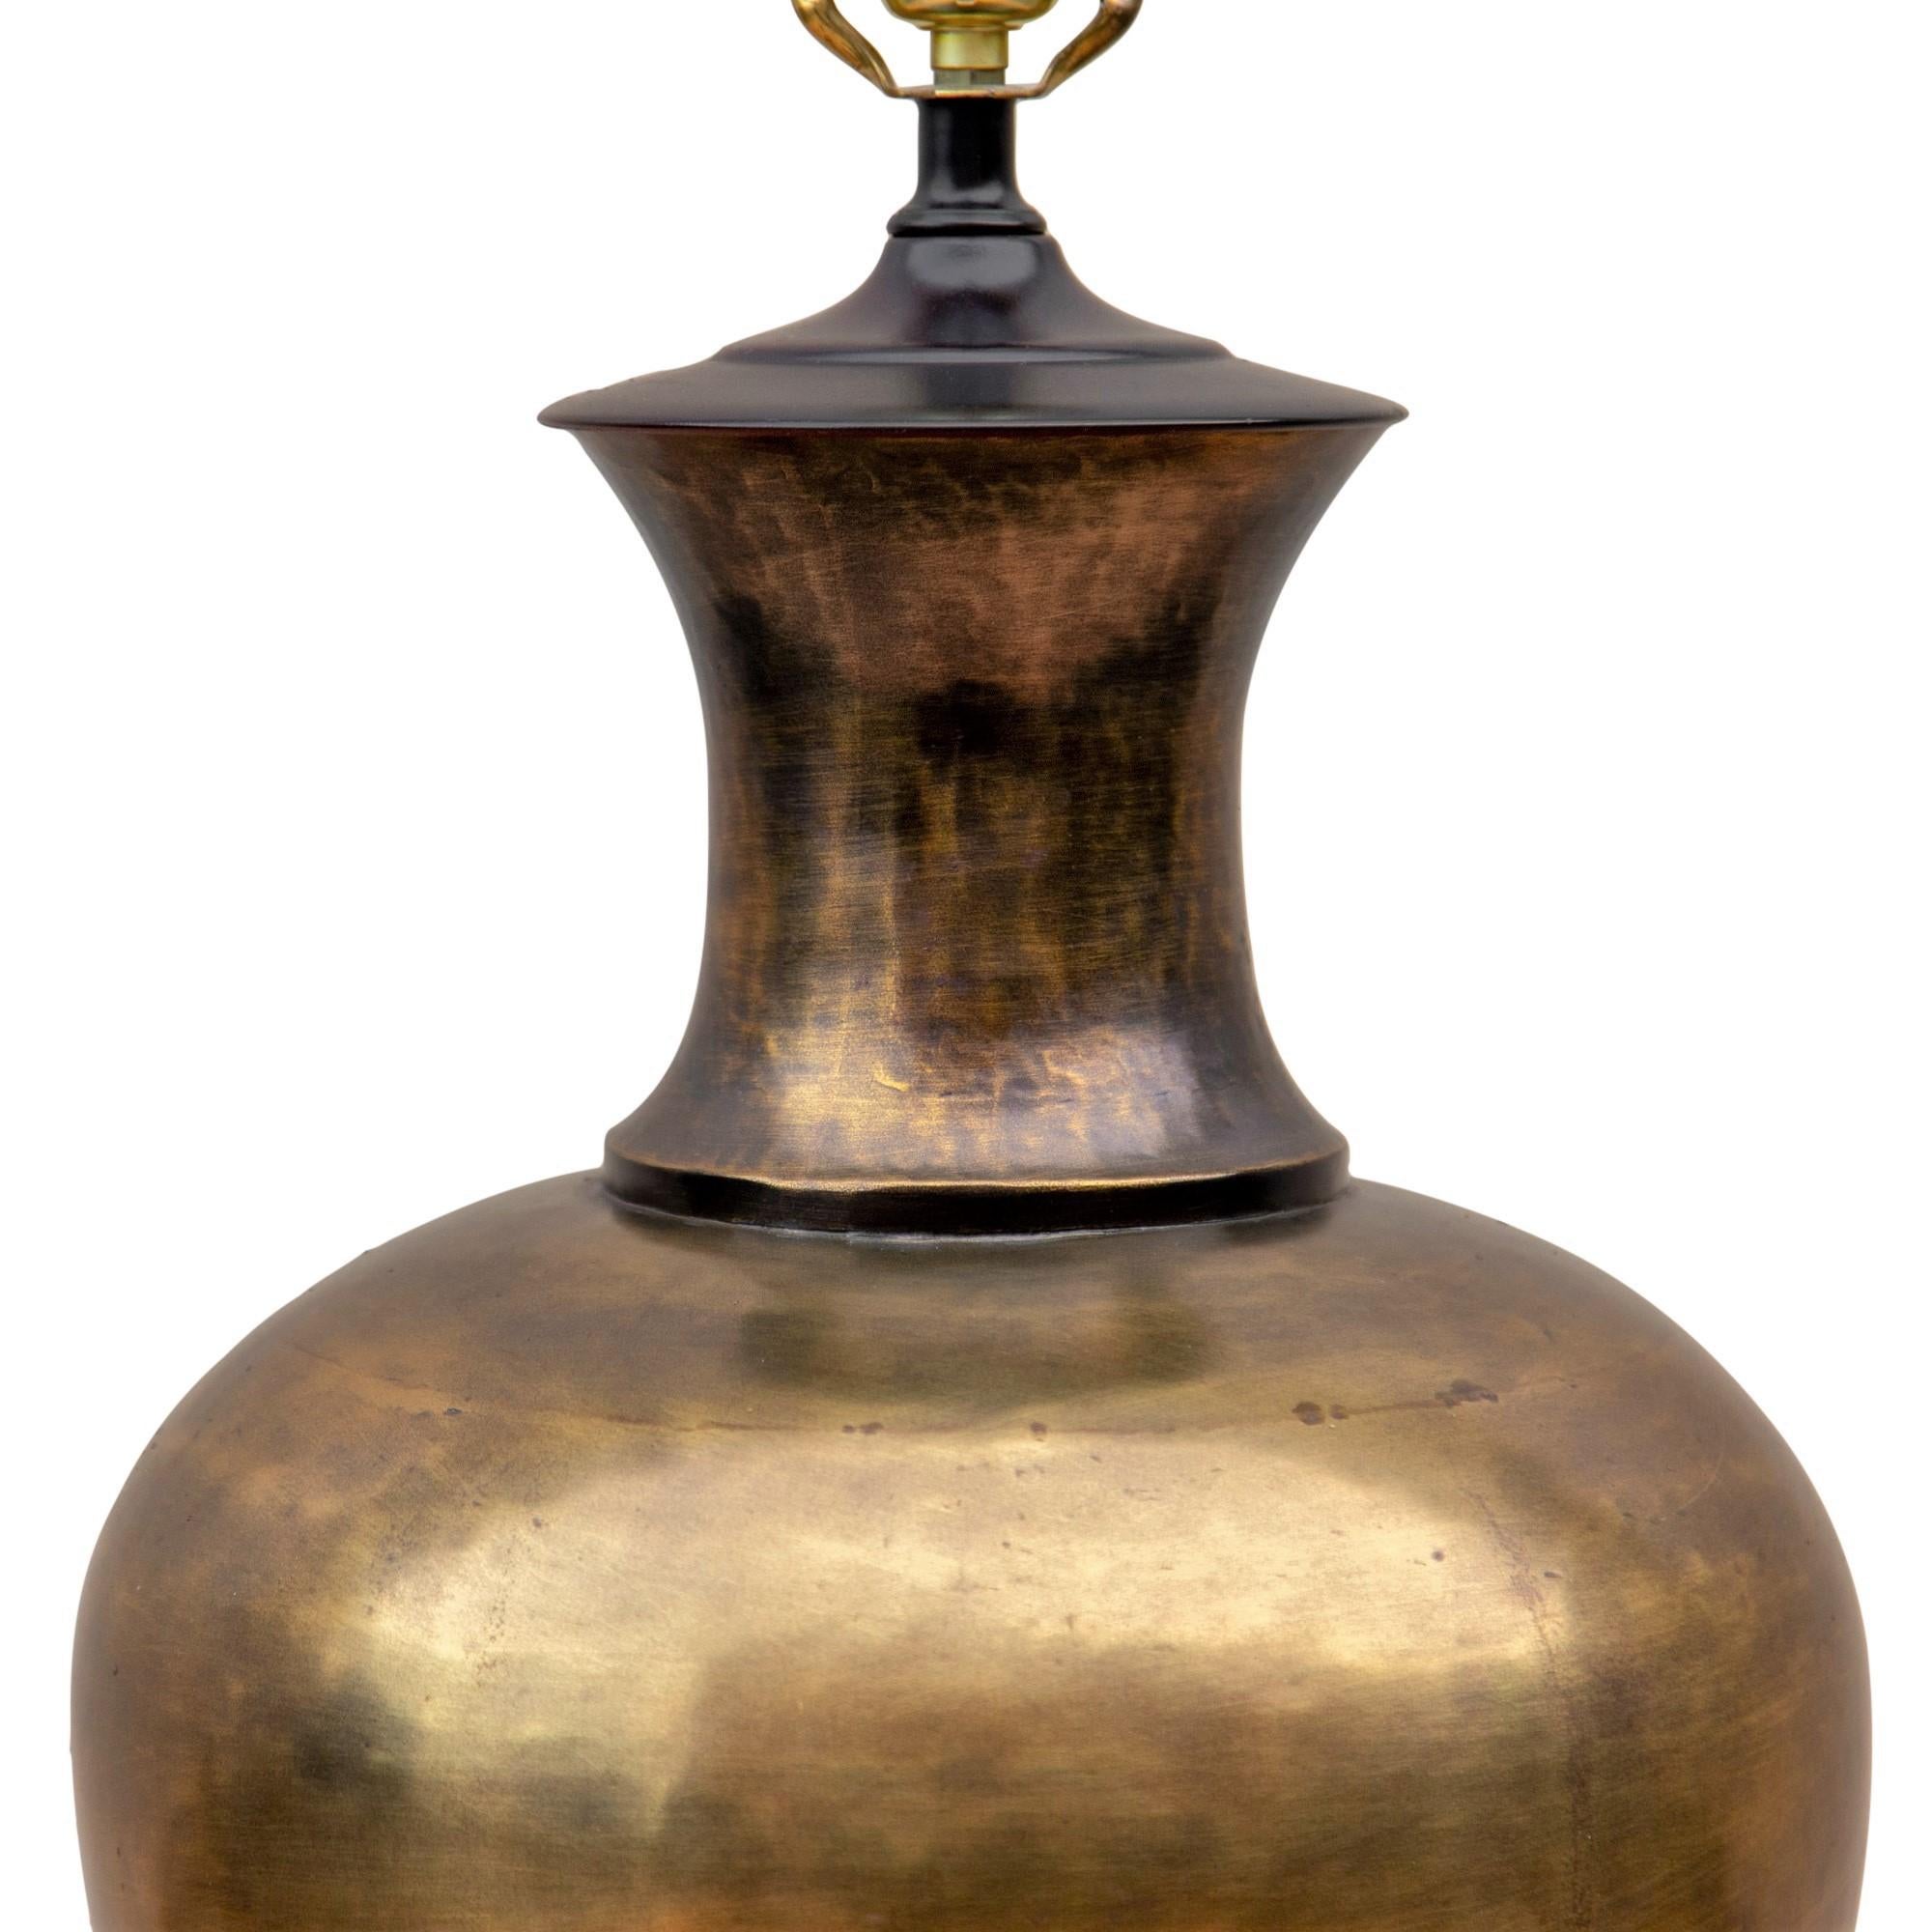 Hollywood Regency Large Brass Urn Lamp with Black Shade by Tyndale